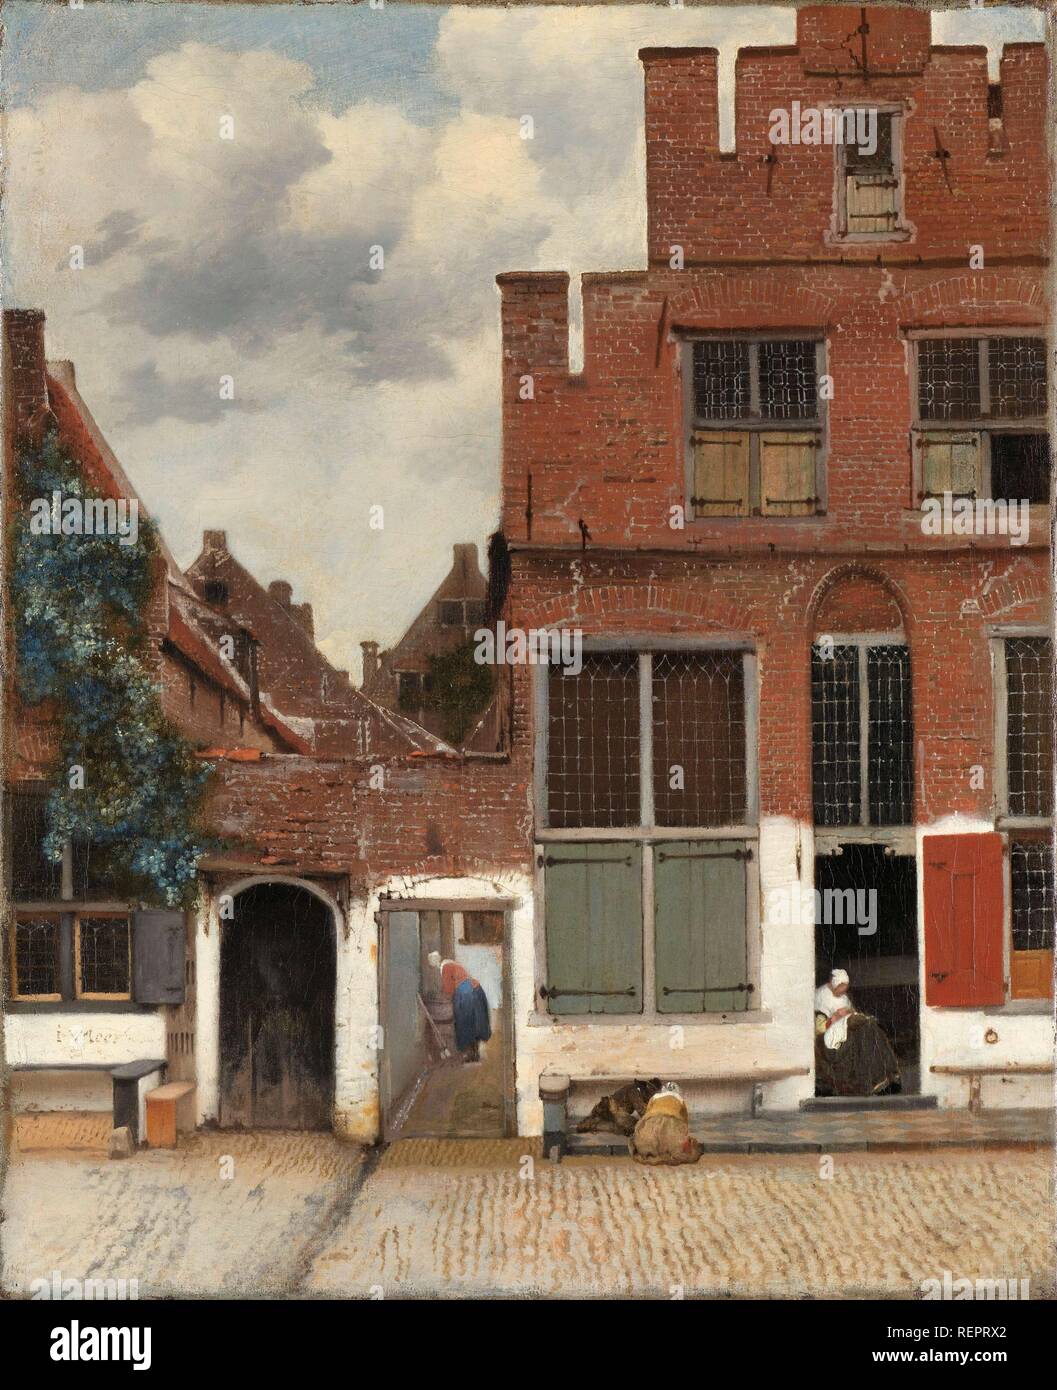 View of Houses in Delft, Known as 'The Little Street'. View of Houses in Delft, Known as The Little Street. Dating: c. 1658. Measurements: h 54.3 cm × w 44 cm × d 9 cm. Museum: Rijksmuseum, Amsterdam. Author: JOHANNES VERMEER. VERMEER, JOHANNES. JAN VERMEER. Vermeer, Jan (Johannes). Stock Photo